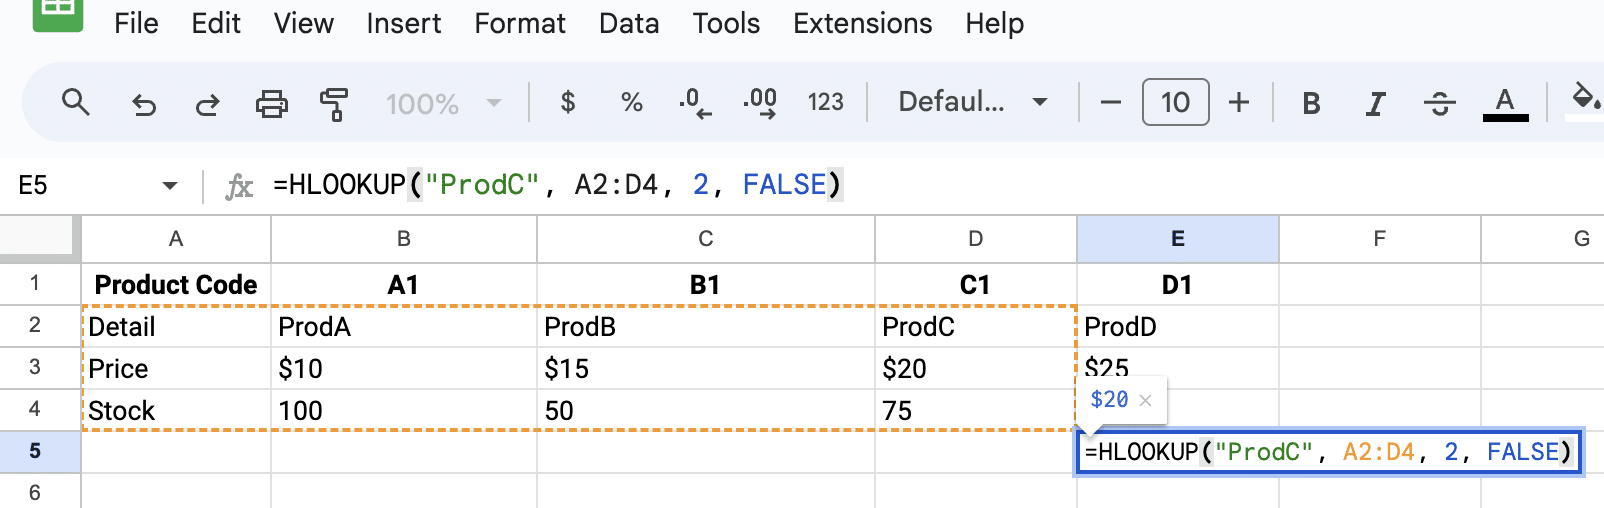 Using HLOOKUP with exact match to find specific data in a row in Google Sheets.